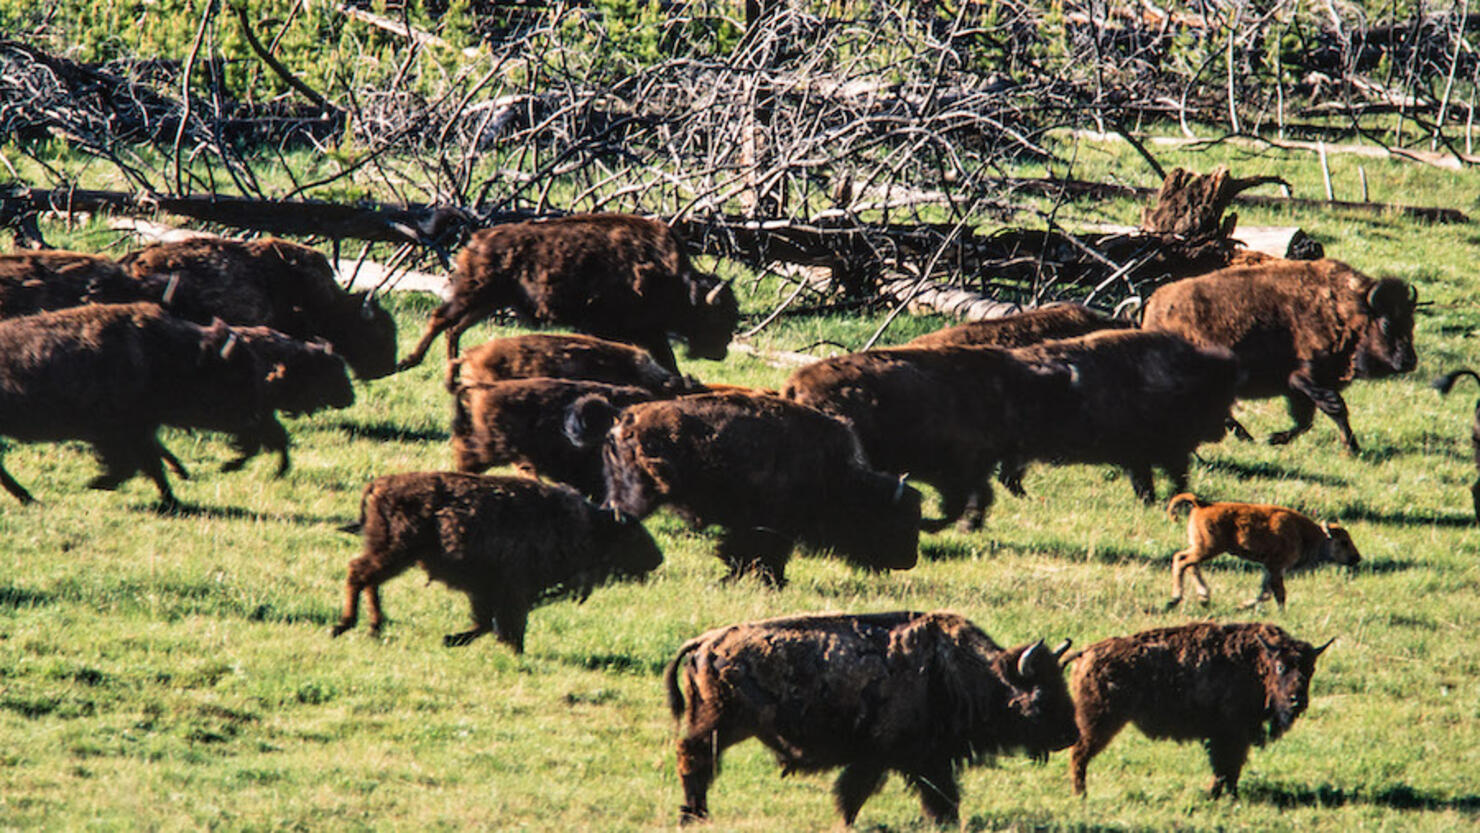 A herd of bison stampedes across a meadow in Yellowstone National Park in Wyoming, USA.